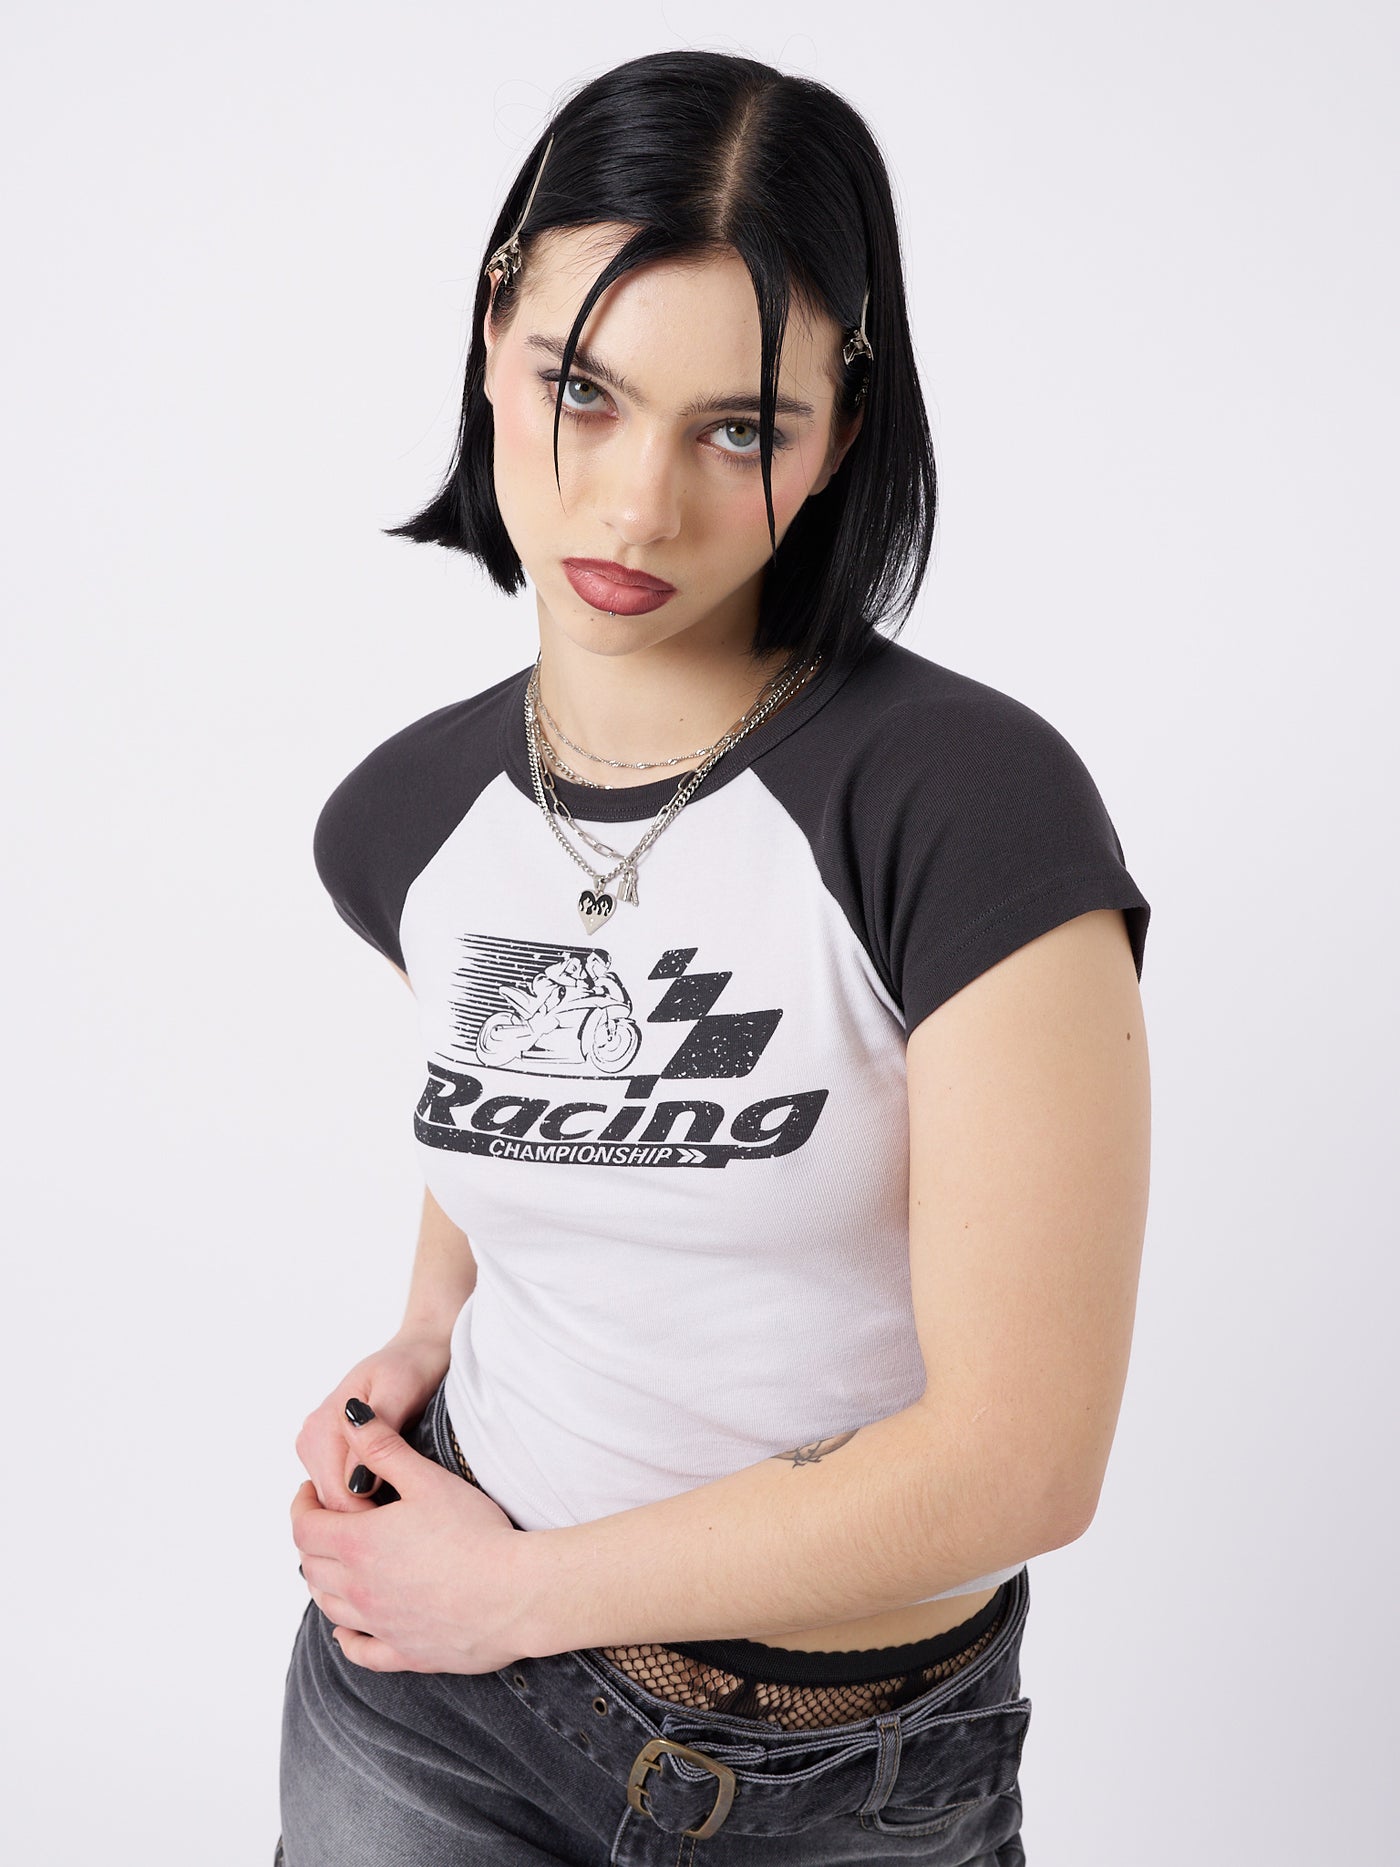 Dynamic black and white raglan baby tee inspired by motor racing. Perfect for a sporty and stylish casual look.